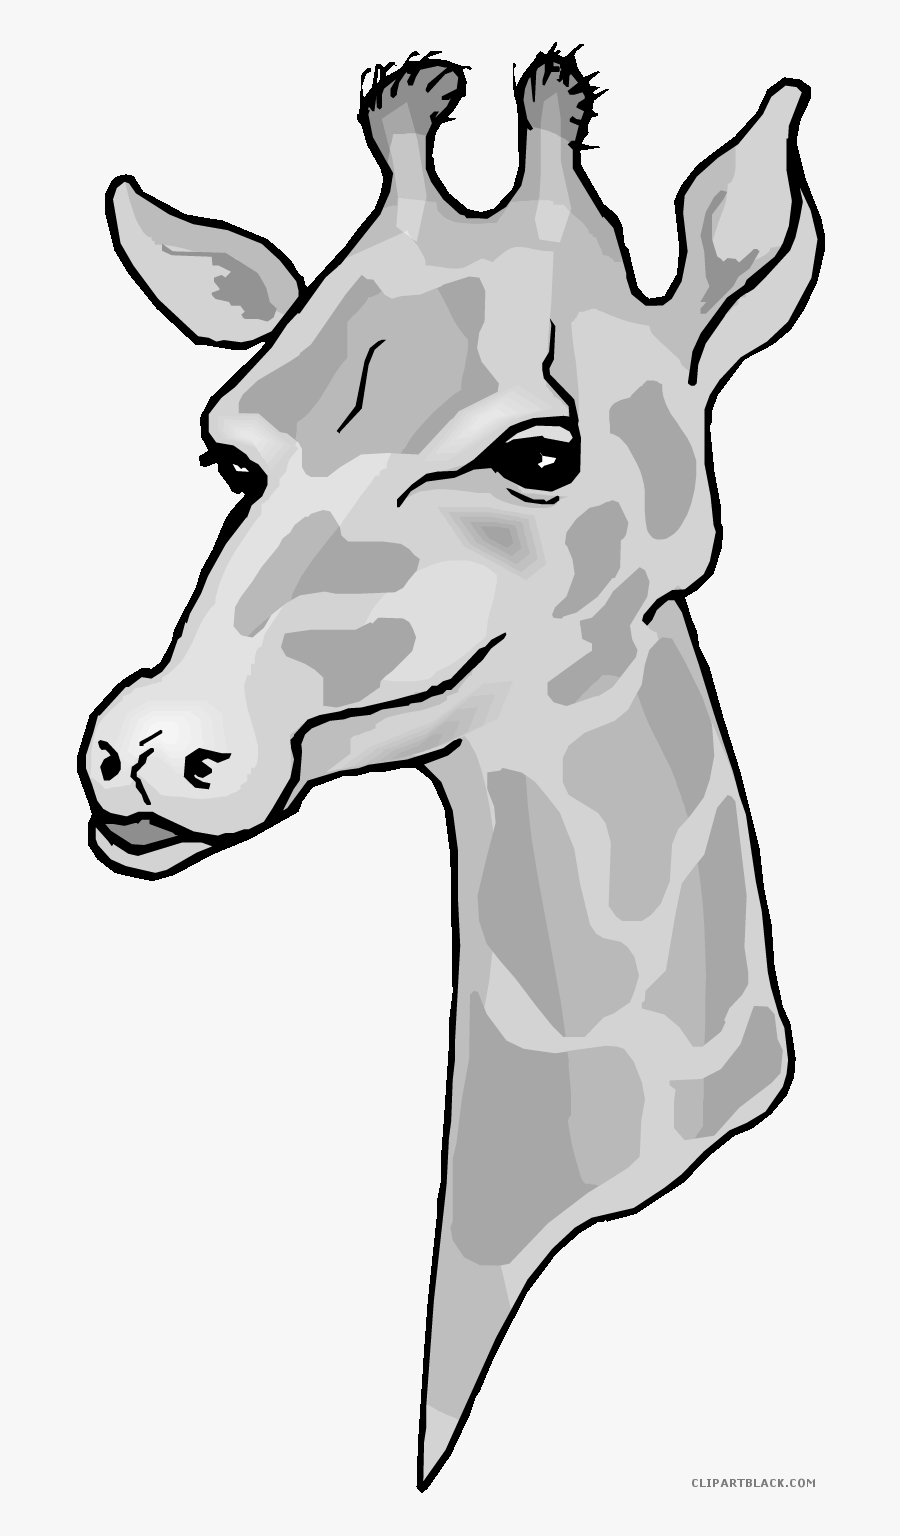 Transparent Head Clipart Black And White - Cartoon Giraffe Giraffe Head Clipart, Transparent Clipart